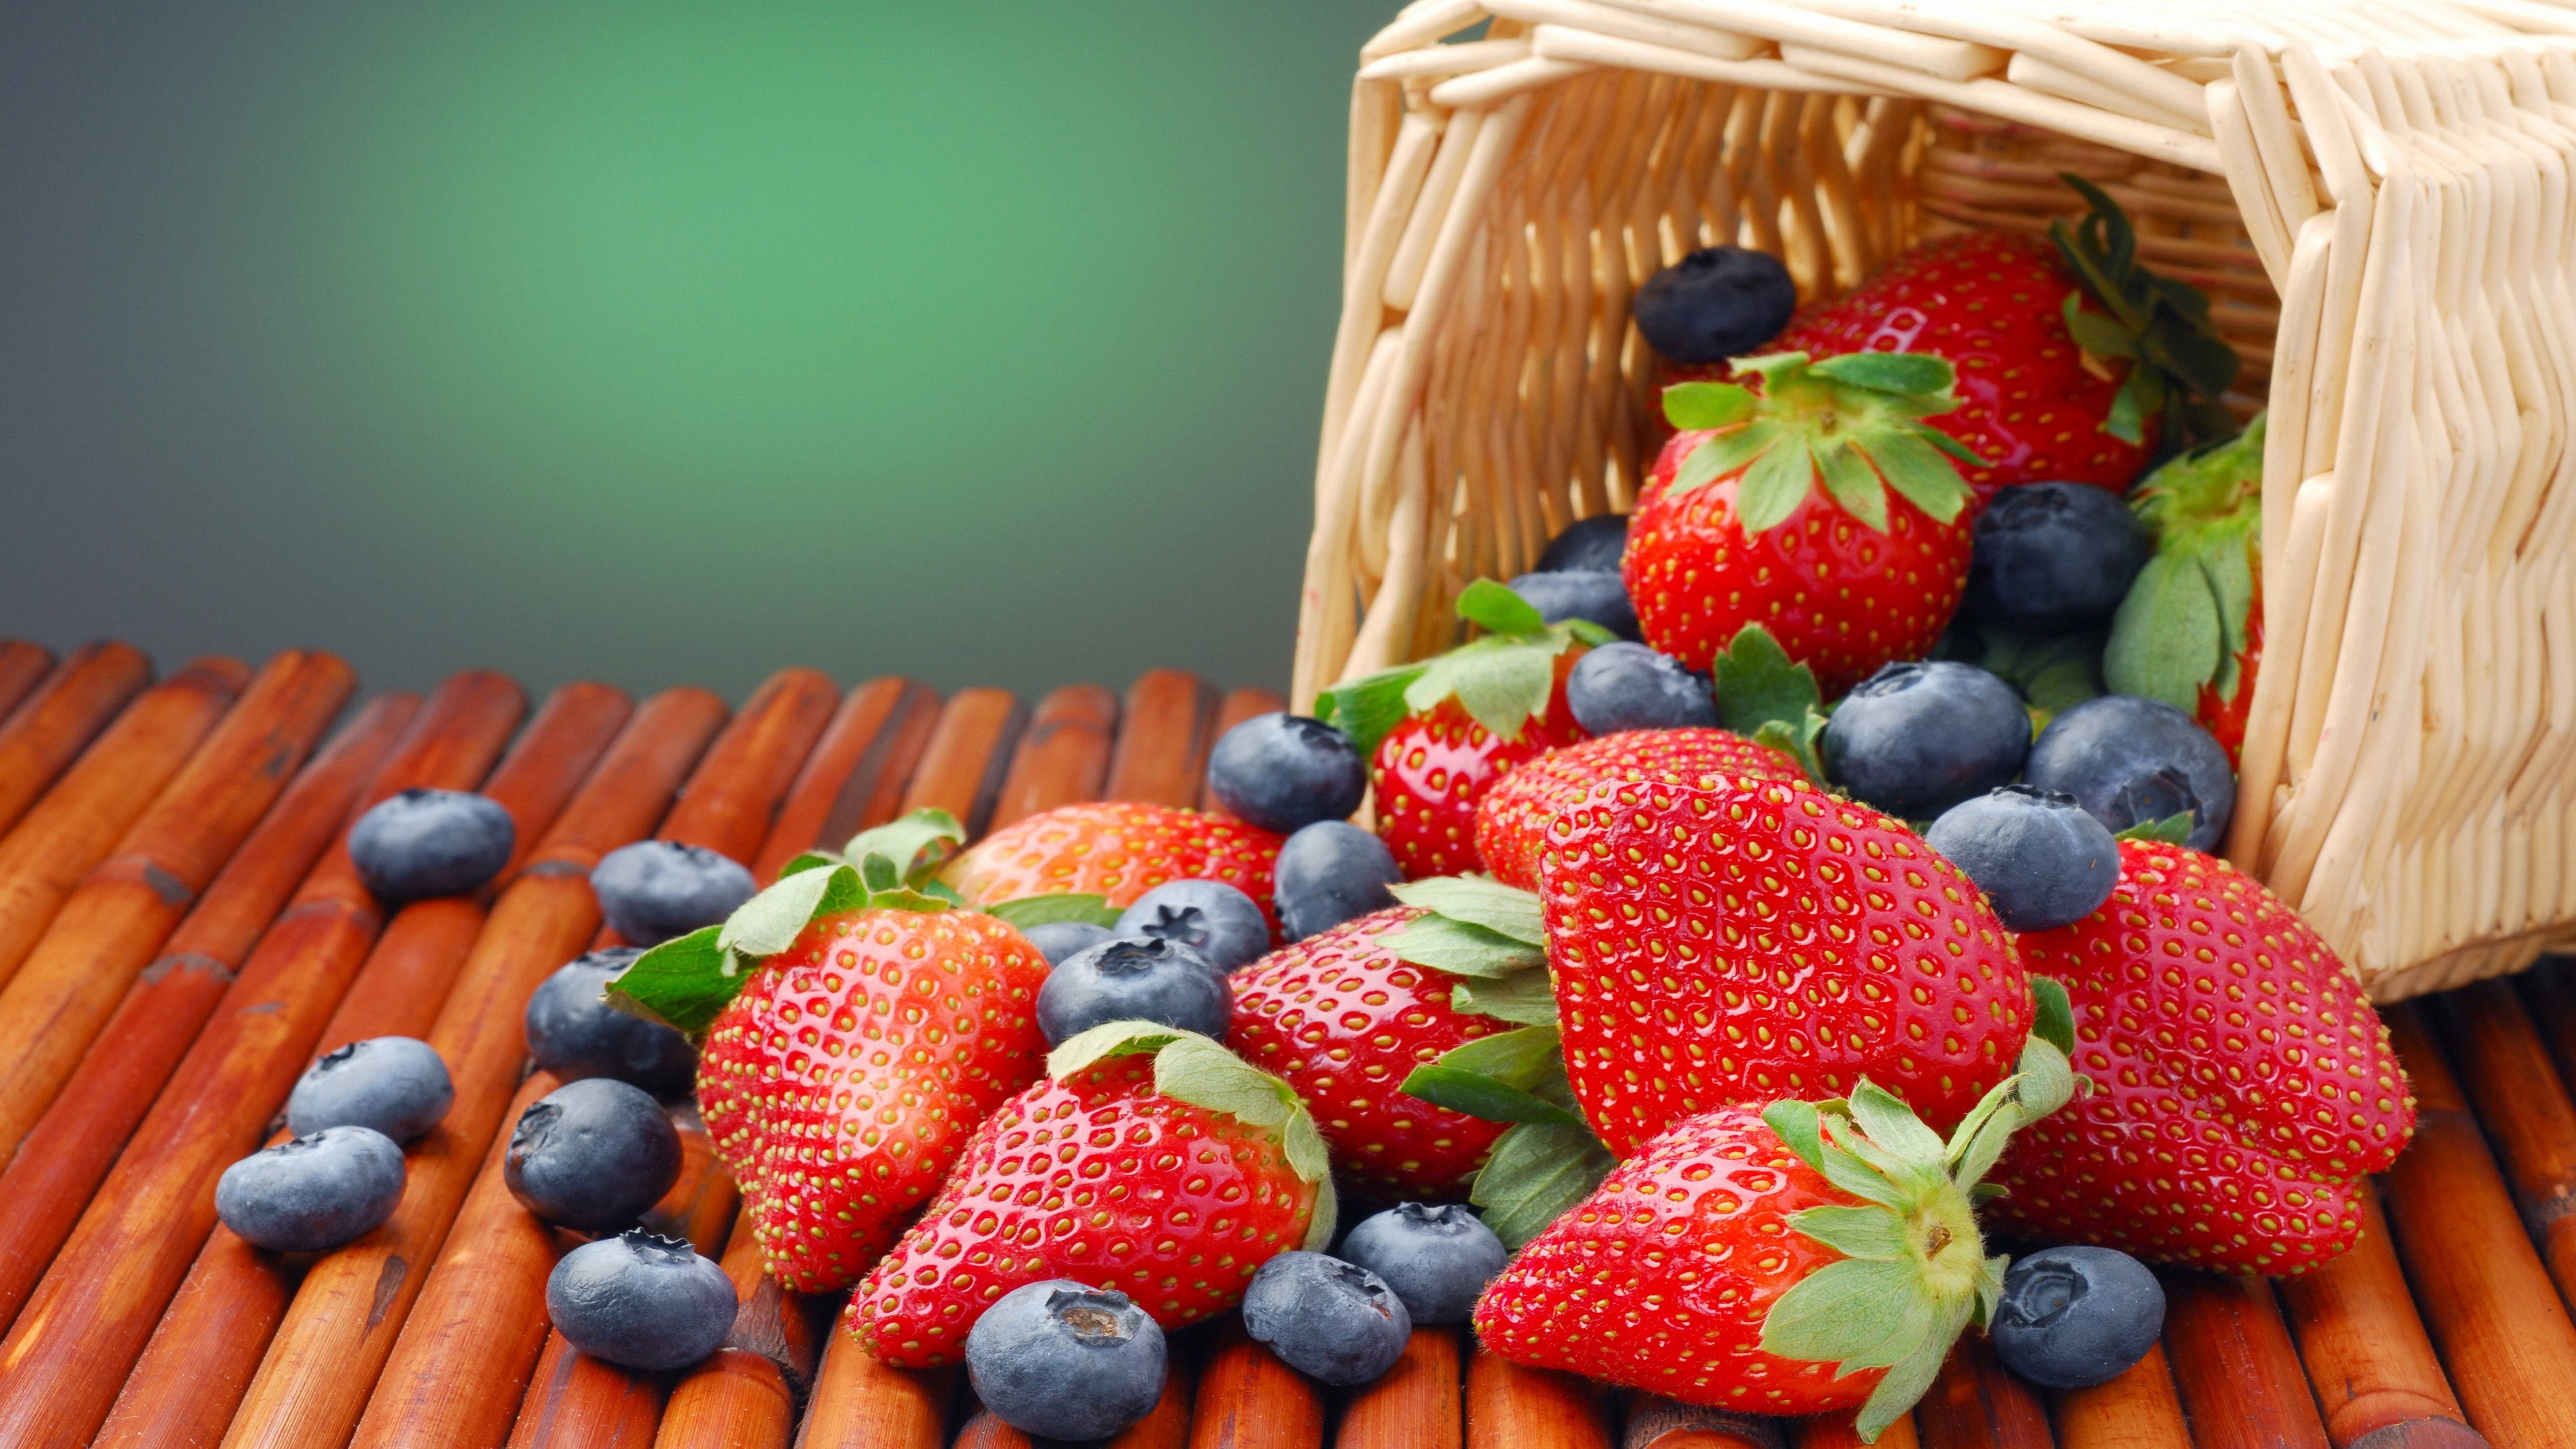 Strawberries in the basket for 5120 x 2880 5K Ultra HD resolution